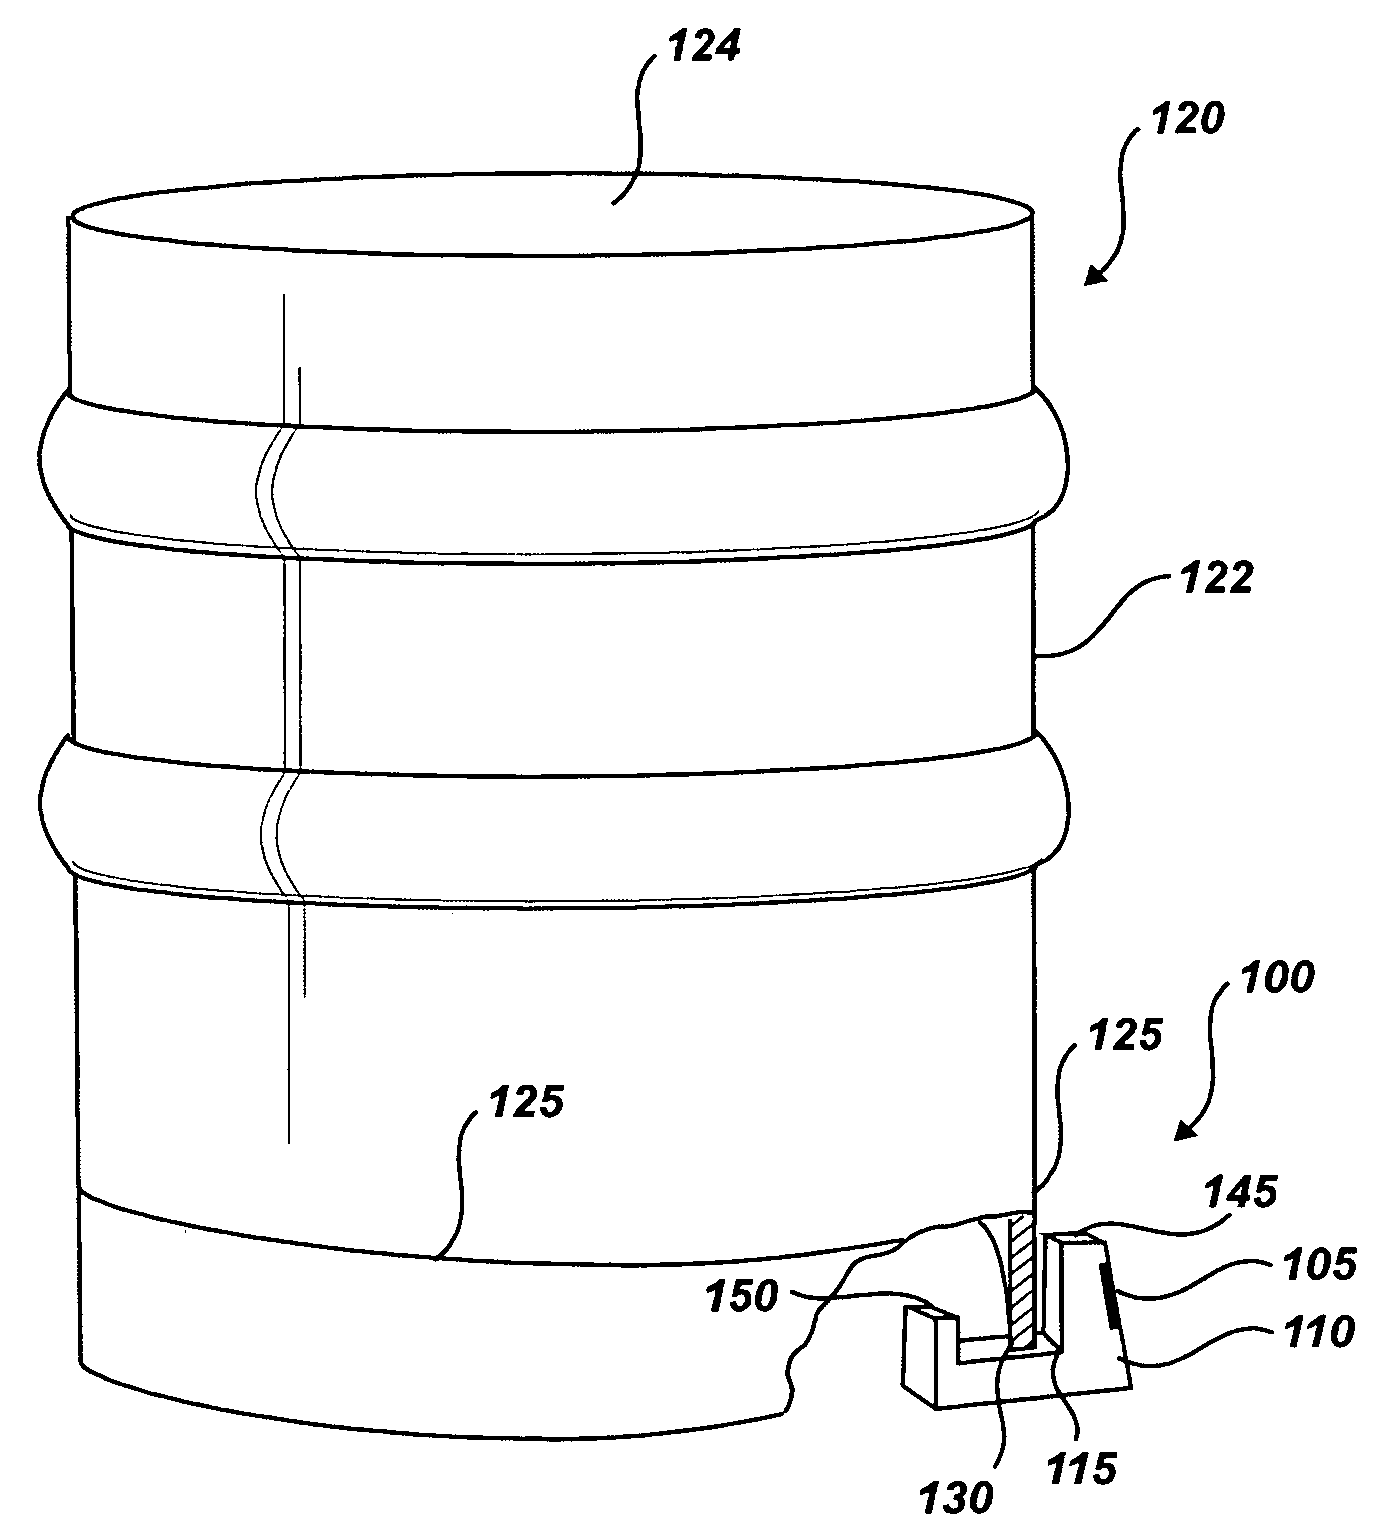 Device for measuring and displaying the amount of beer in a keg